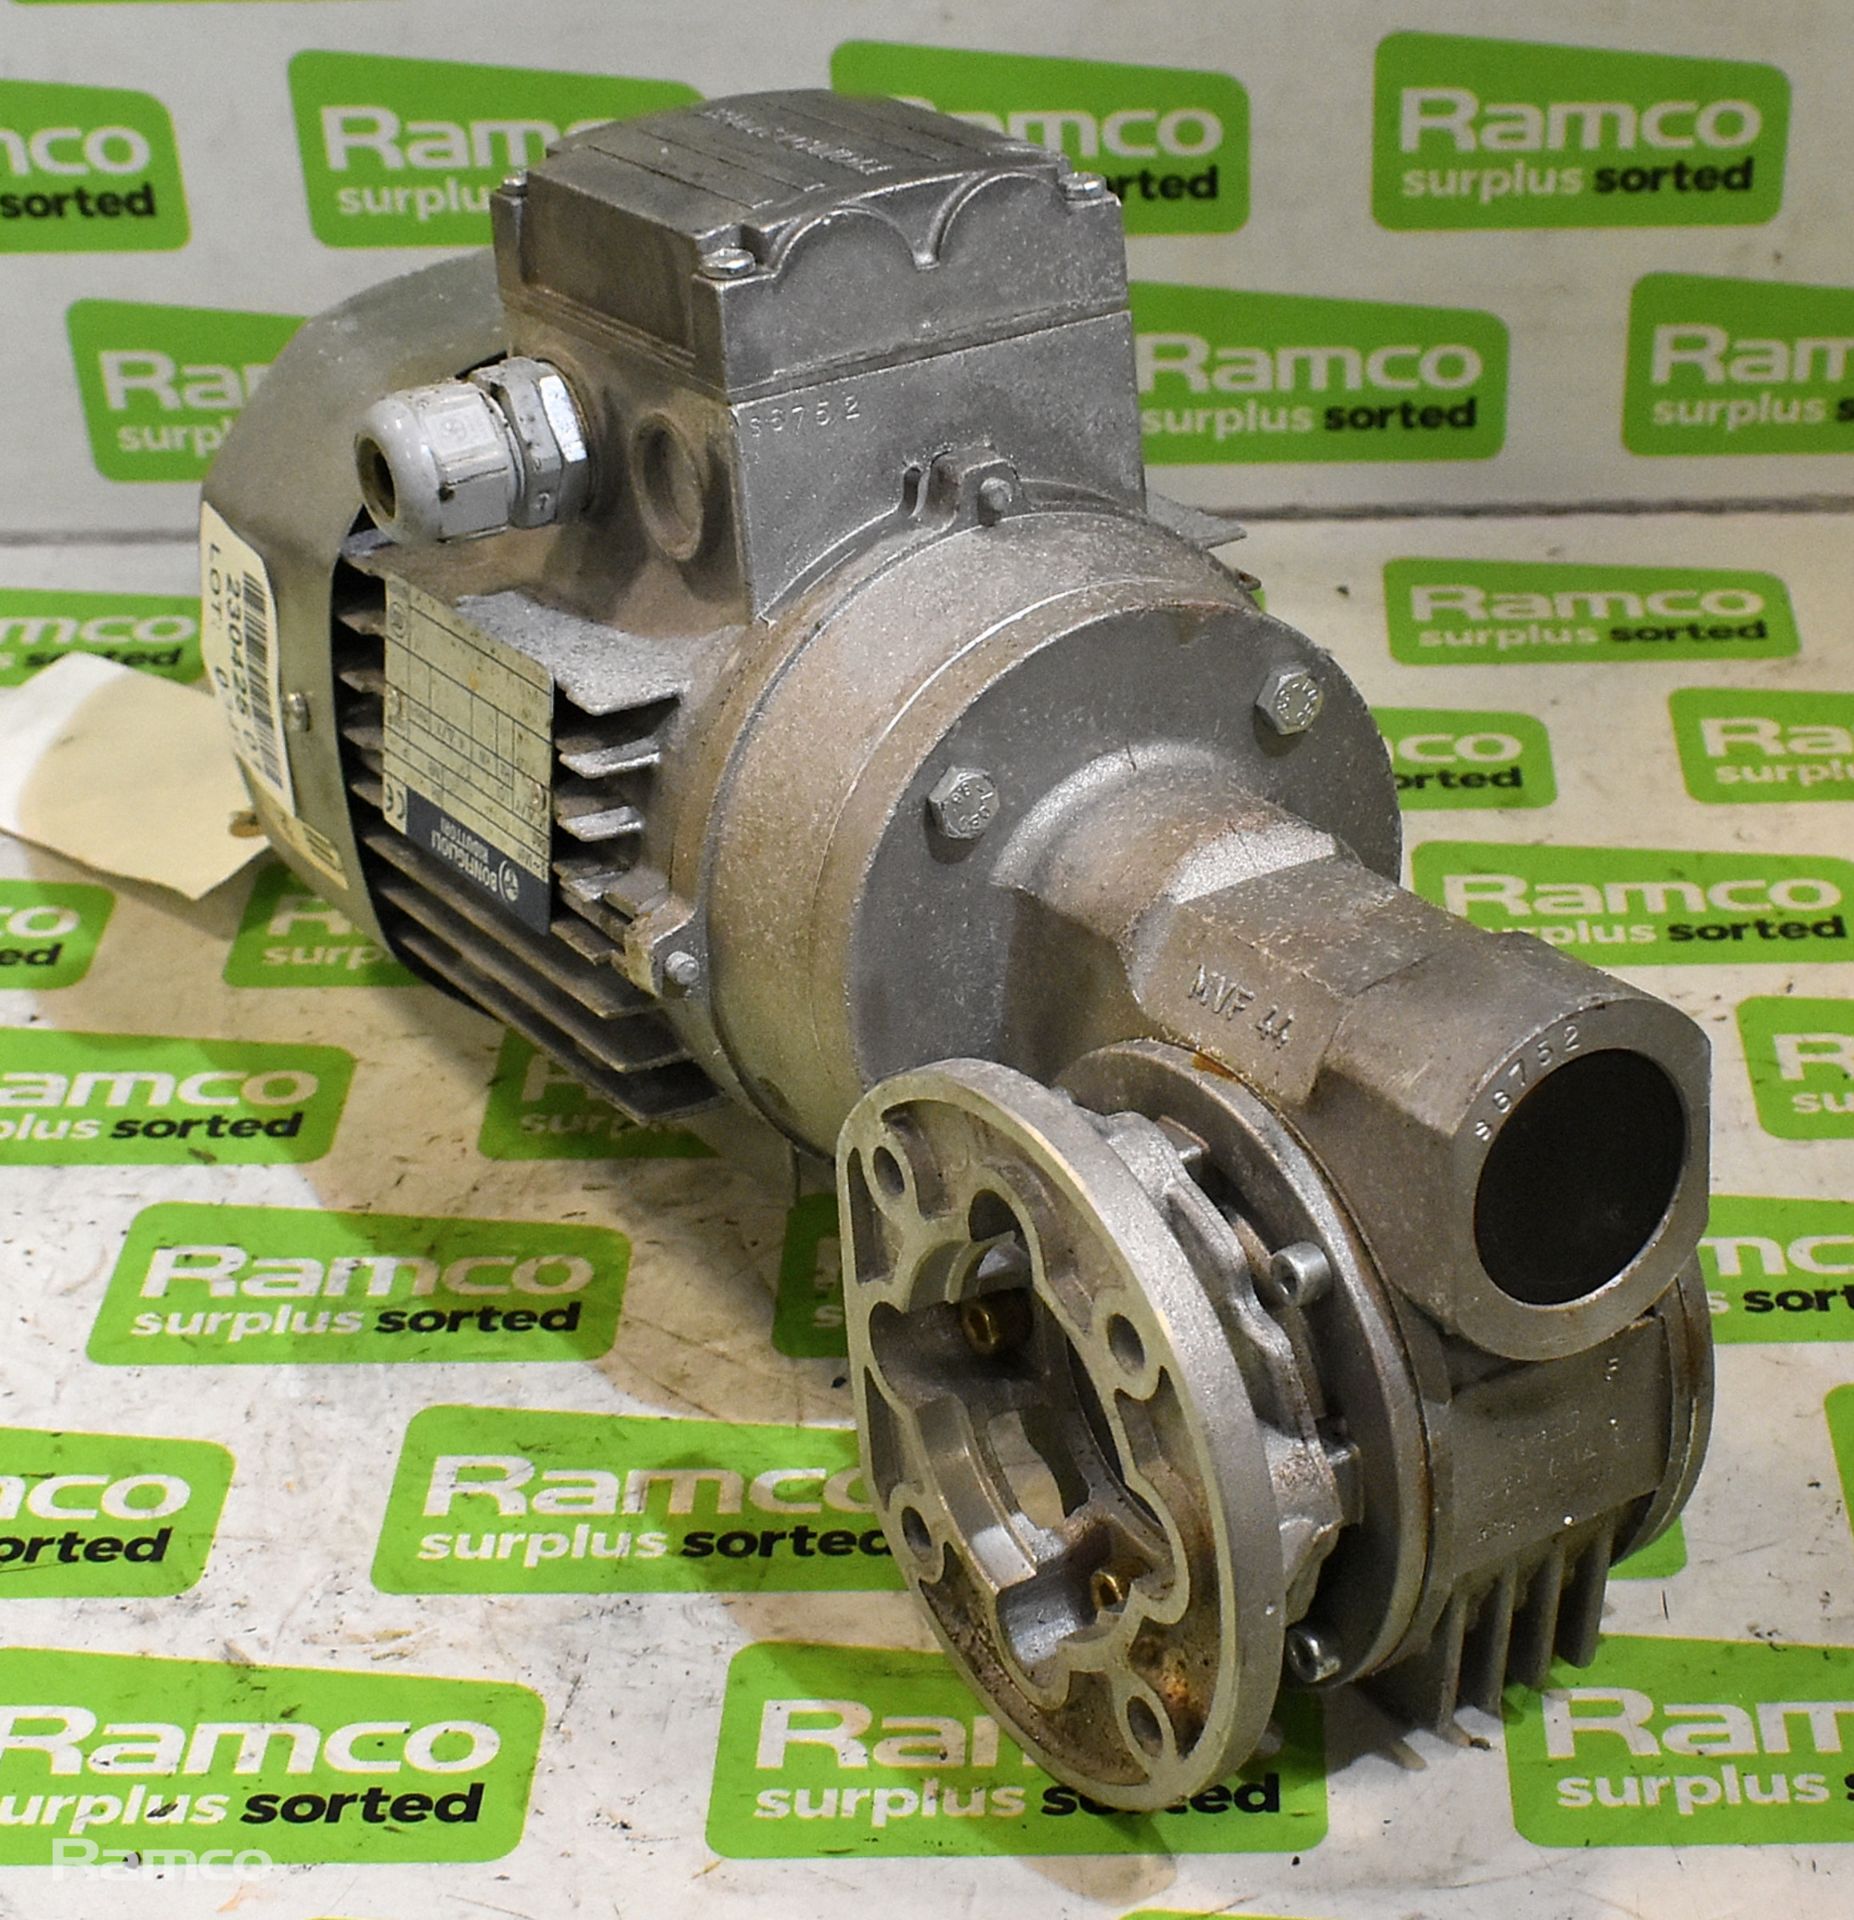 Bonfiglioli BN71C4 220-480V 3-phase electric motor with VF44F ratio 35:1 gearbox - Image 2 of 5